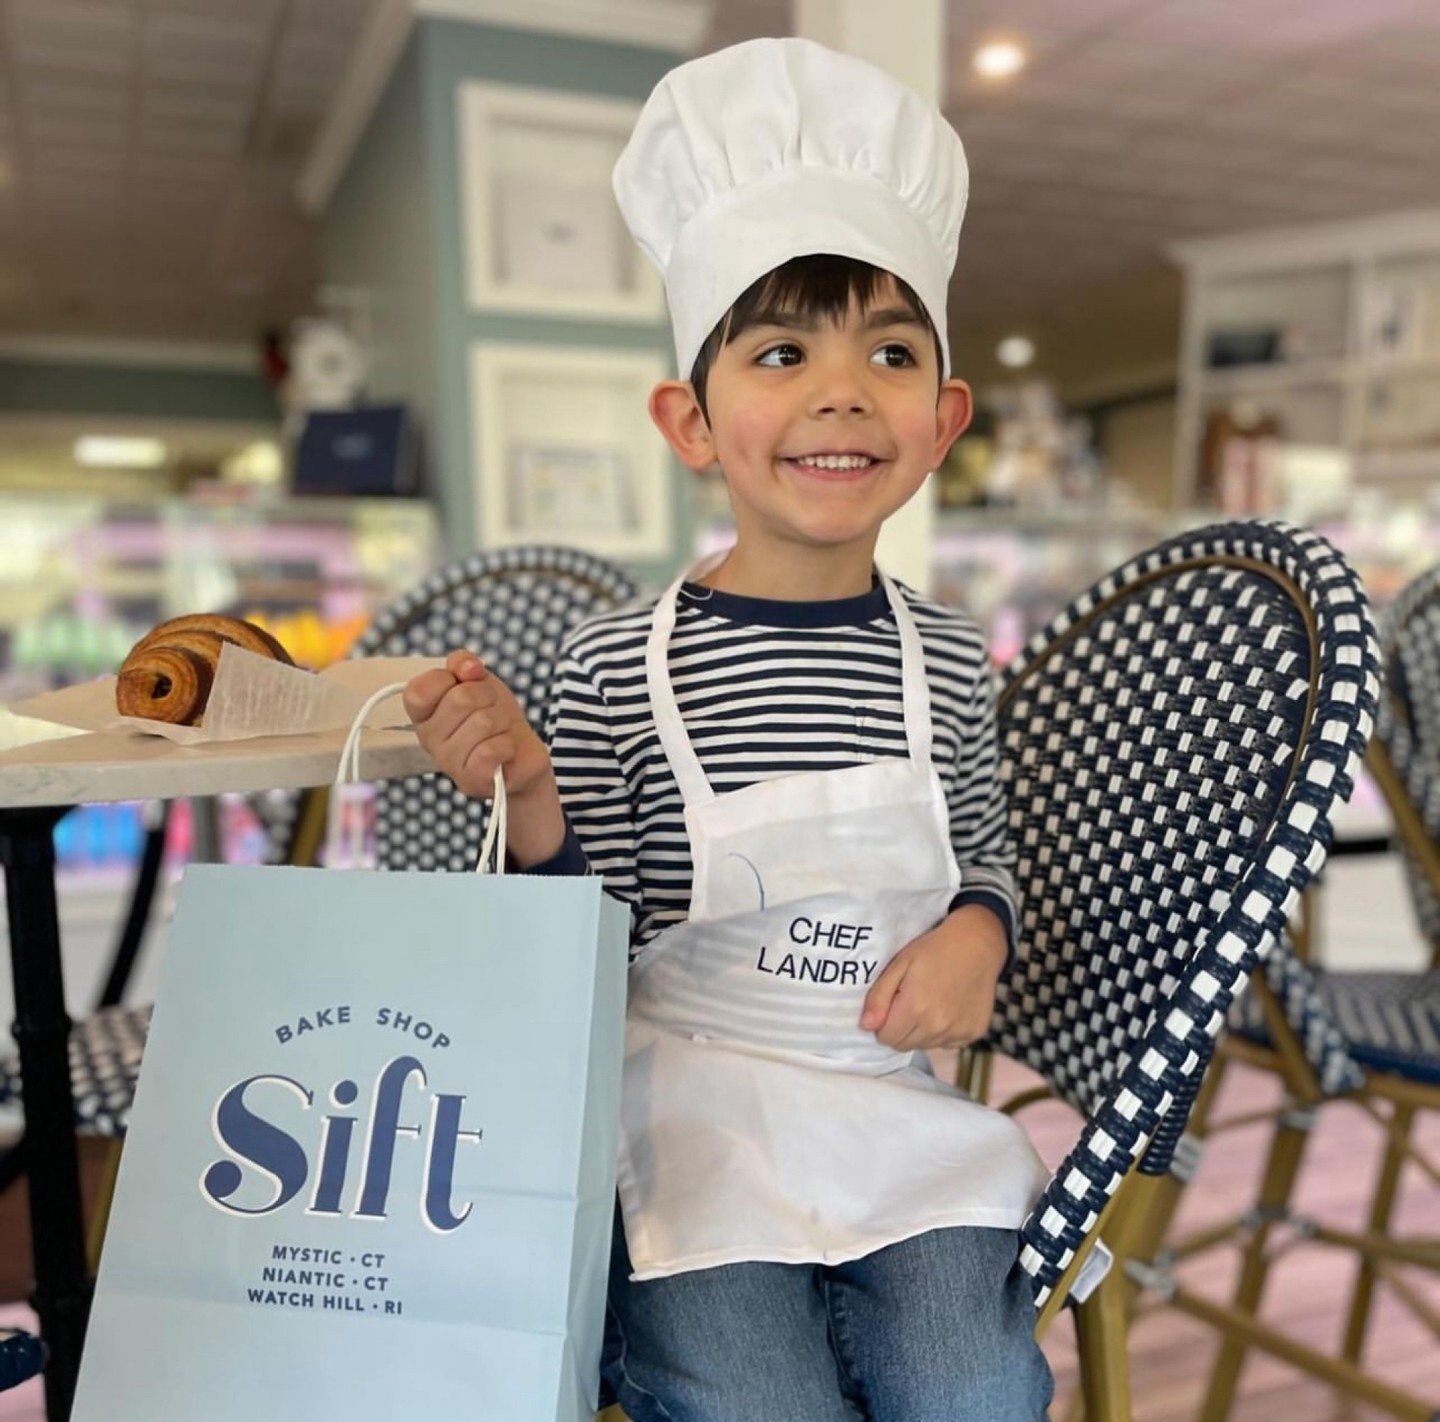 Cuteness overload!! ❤️ 

📸 : @mysticmama79

*
*
*
*
#atyhospitality #siftmystic #siftniantic #siftwatchill #siftbakeshop #mysticct #downtownmystic #ct #pastrychef